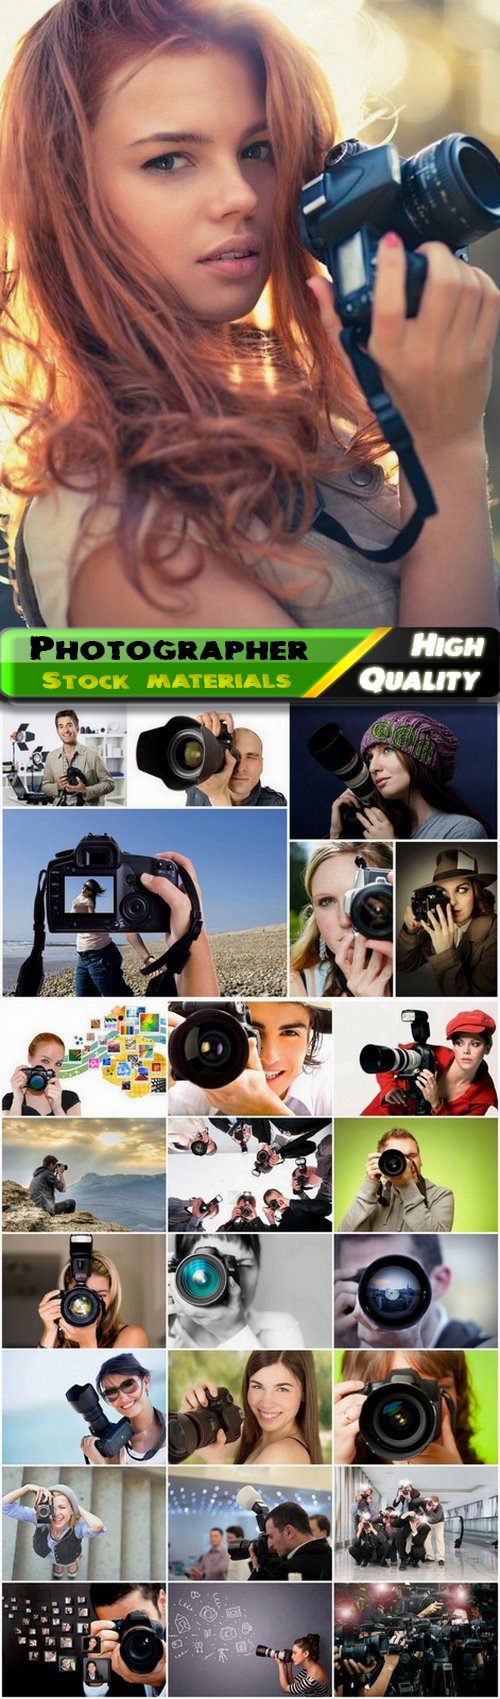 Man and a woman photographer with digital slr camera - 25 HQ Jpg